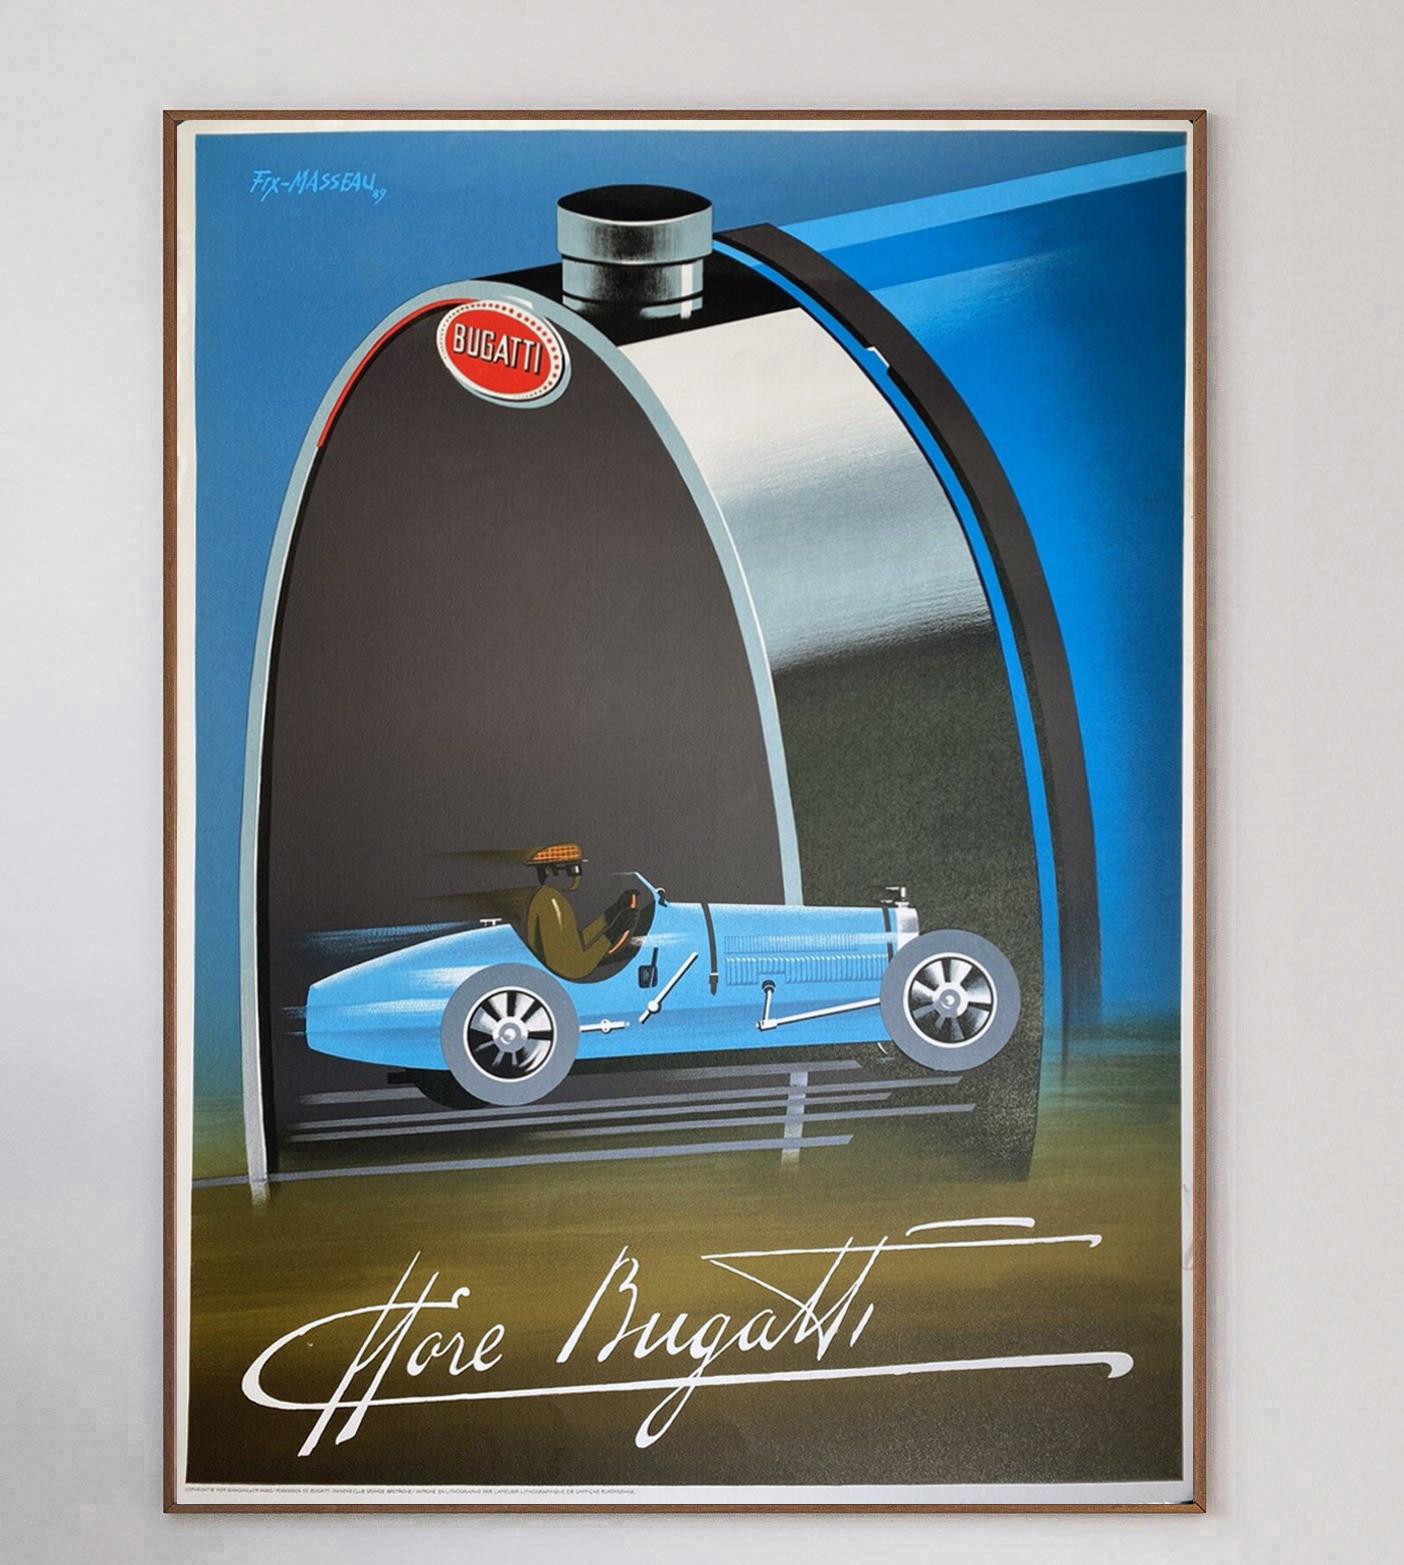 Wonderful art deco poster from Fix-Masseau for Bugatti. This stone lithograph was printed in 1989 and depicts a speeding vintage Bugatti being driven in fantastic style. The German/ French high performance car manufacturer was founded in 1909 and